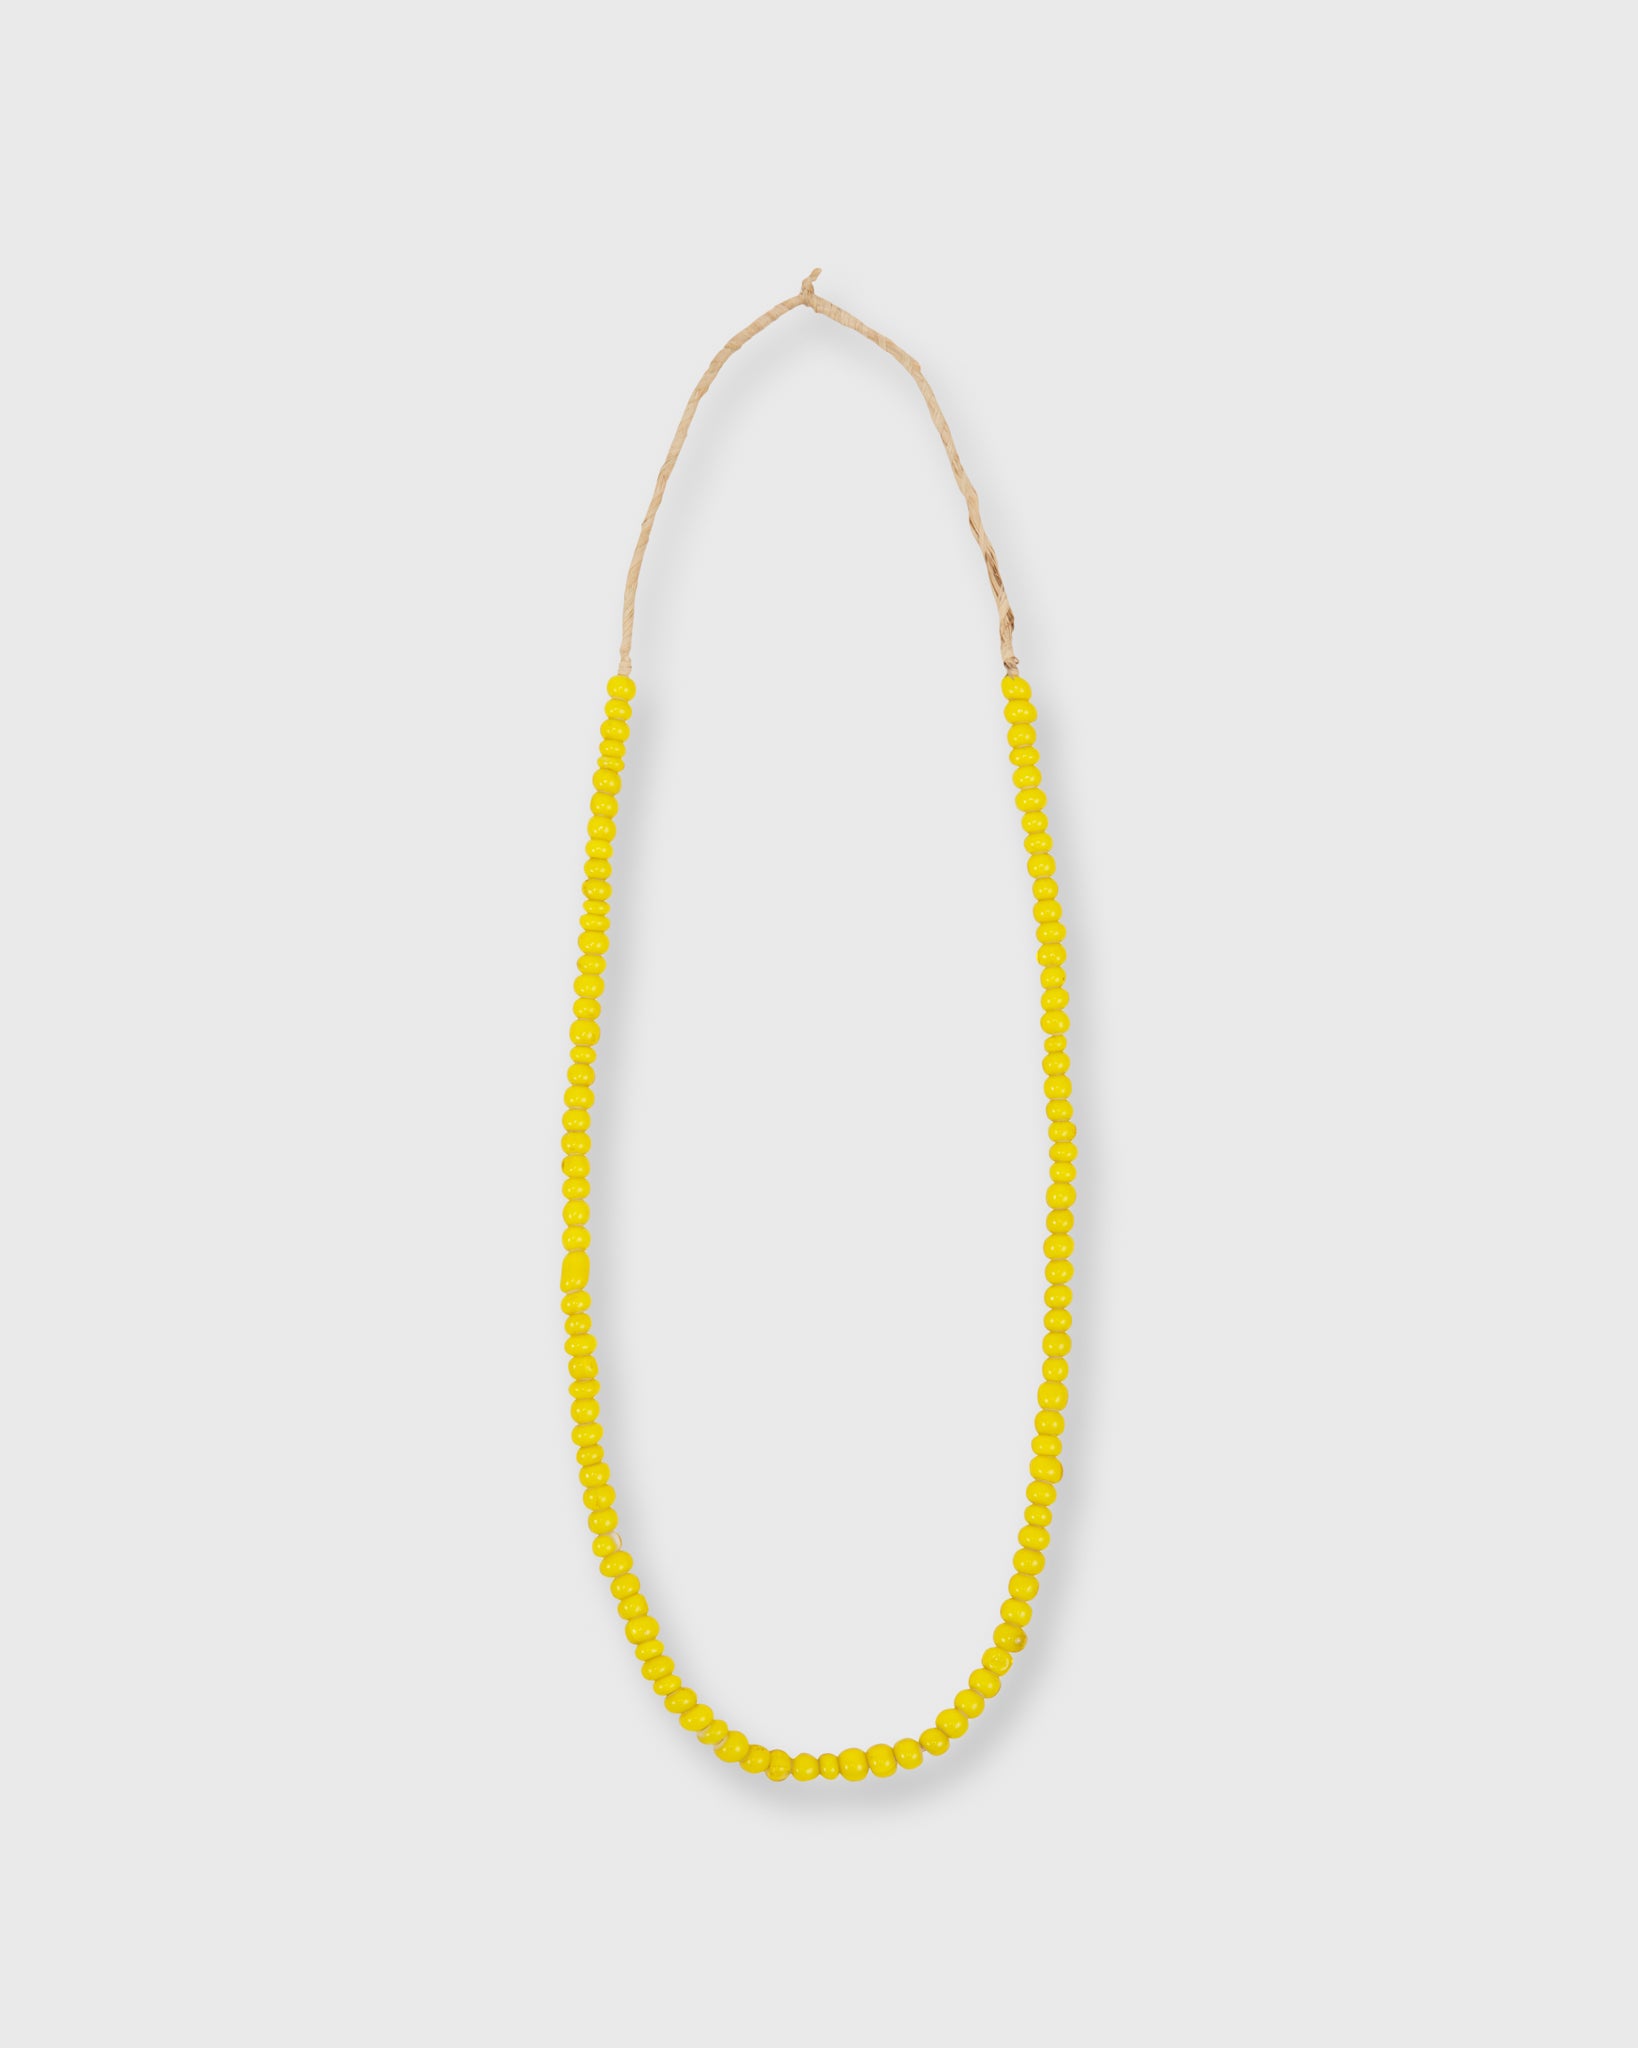 Small African Beads Yellow Whiteheart